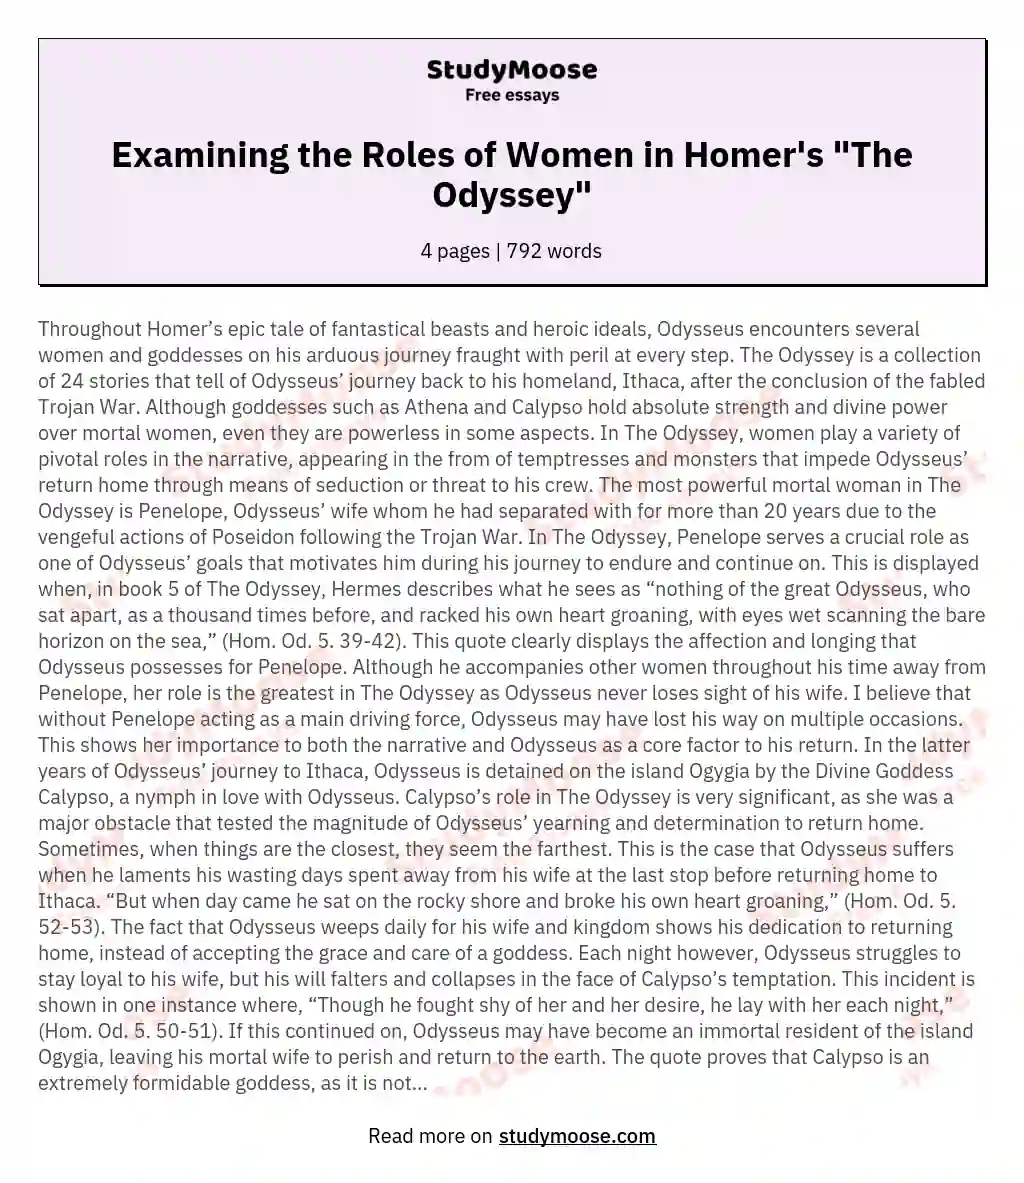 Examining the Roles of Women in Homer's "The Odyssey" essay